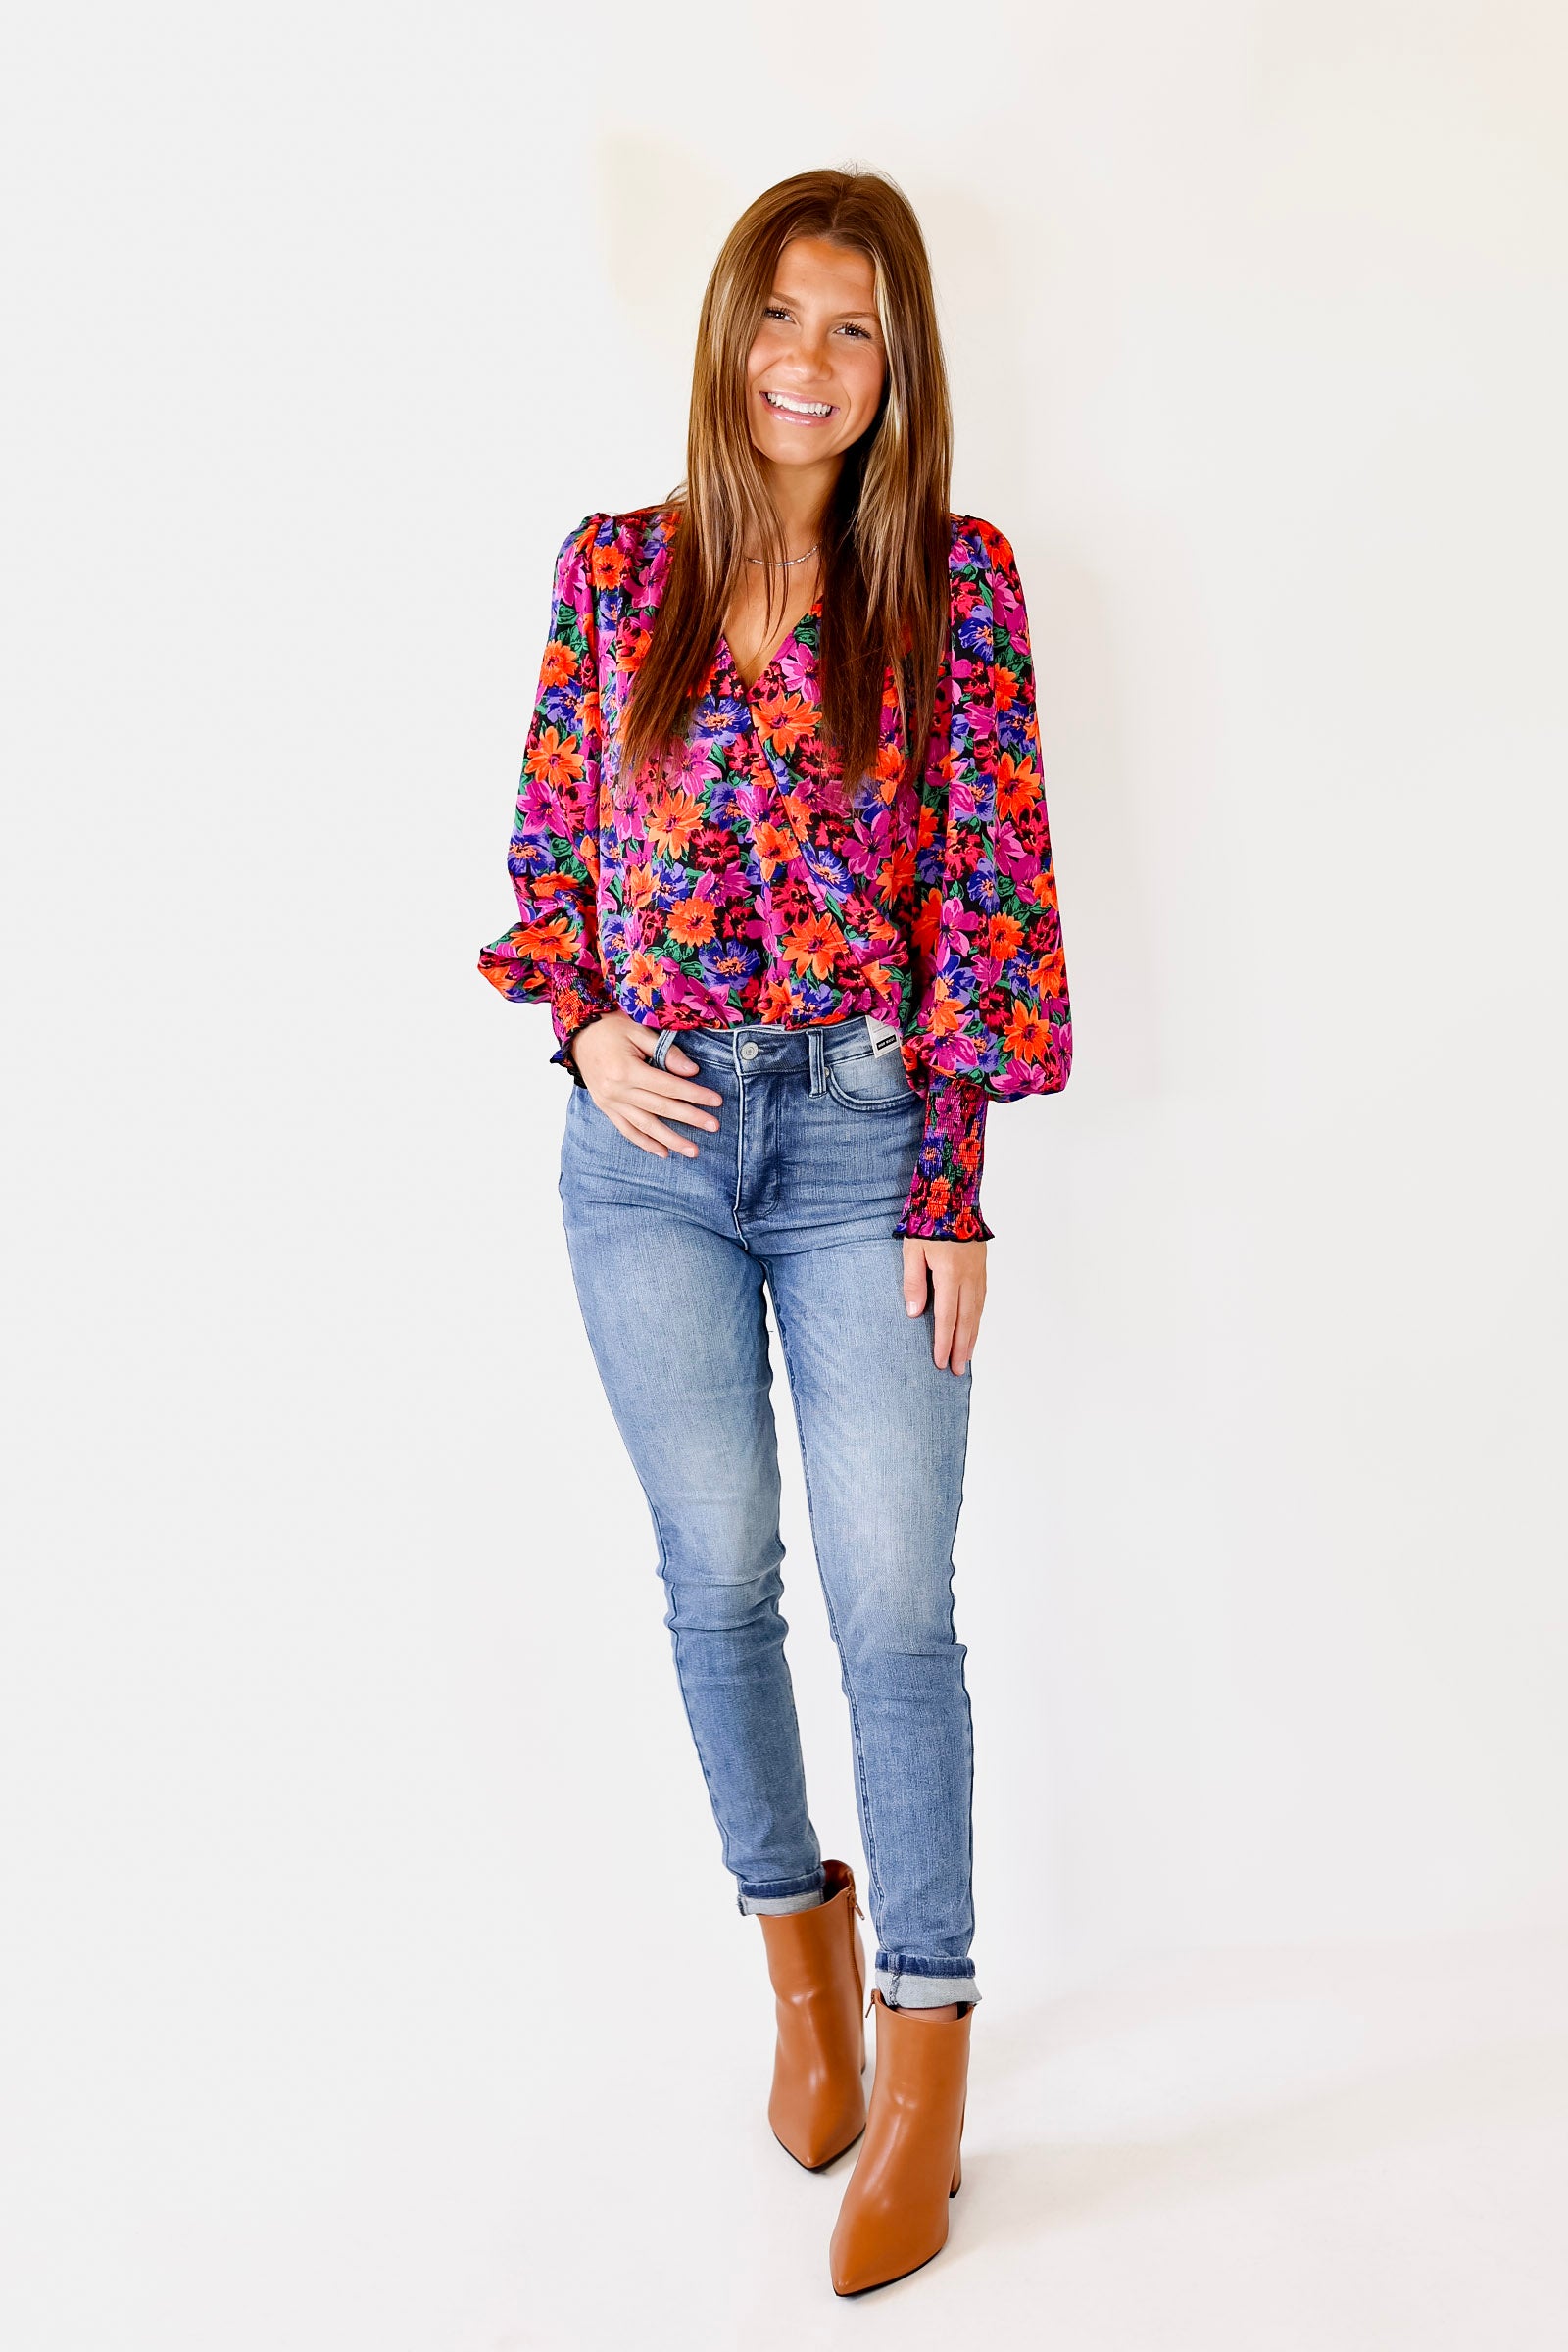 Capture A Memory Floral Long Sleeve Bodysuit in Purple Mix - Giddy Up Glamour Boutique